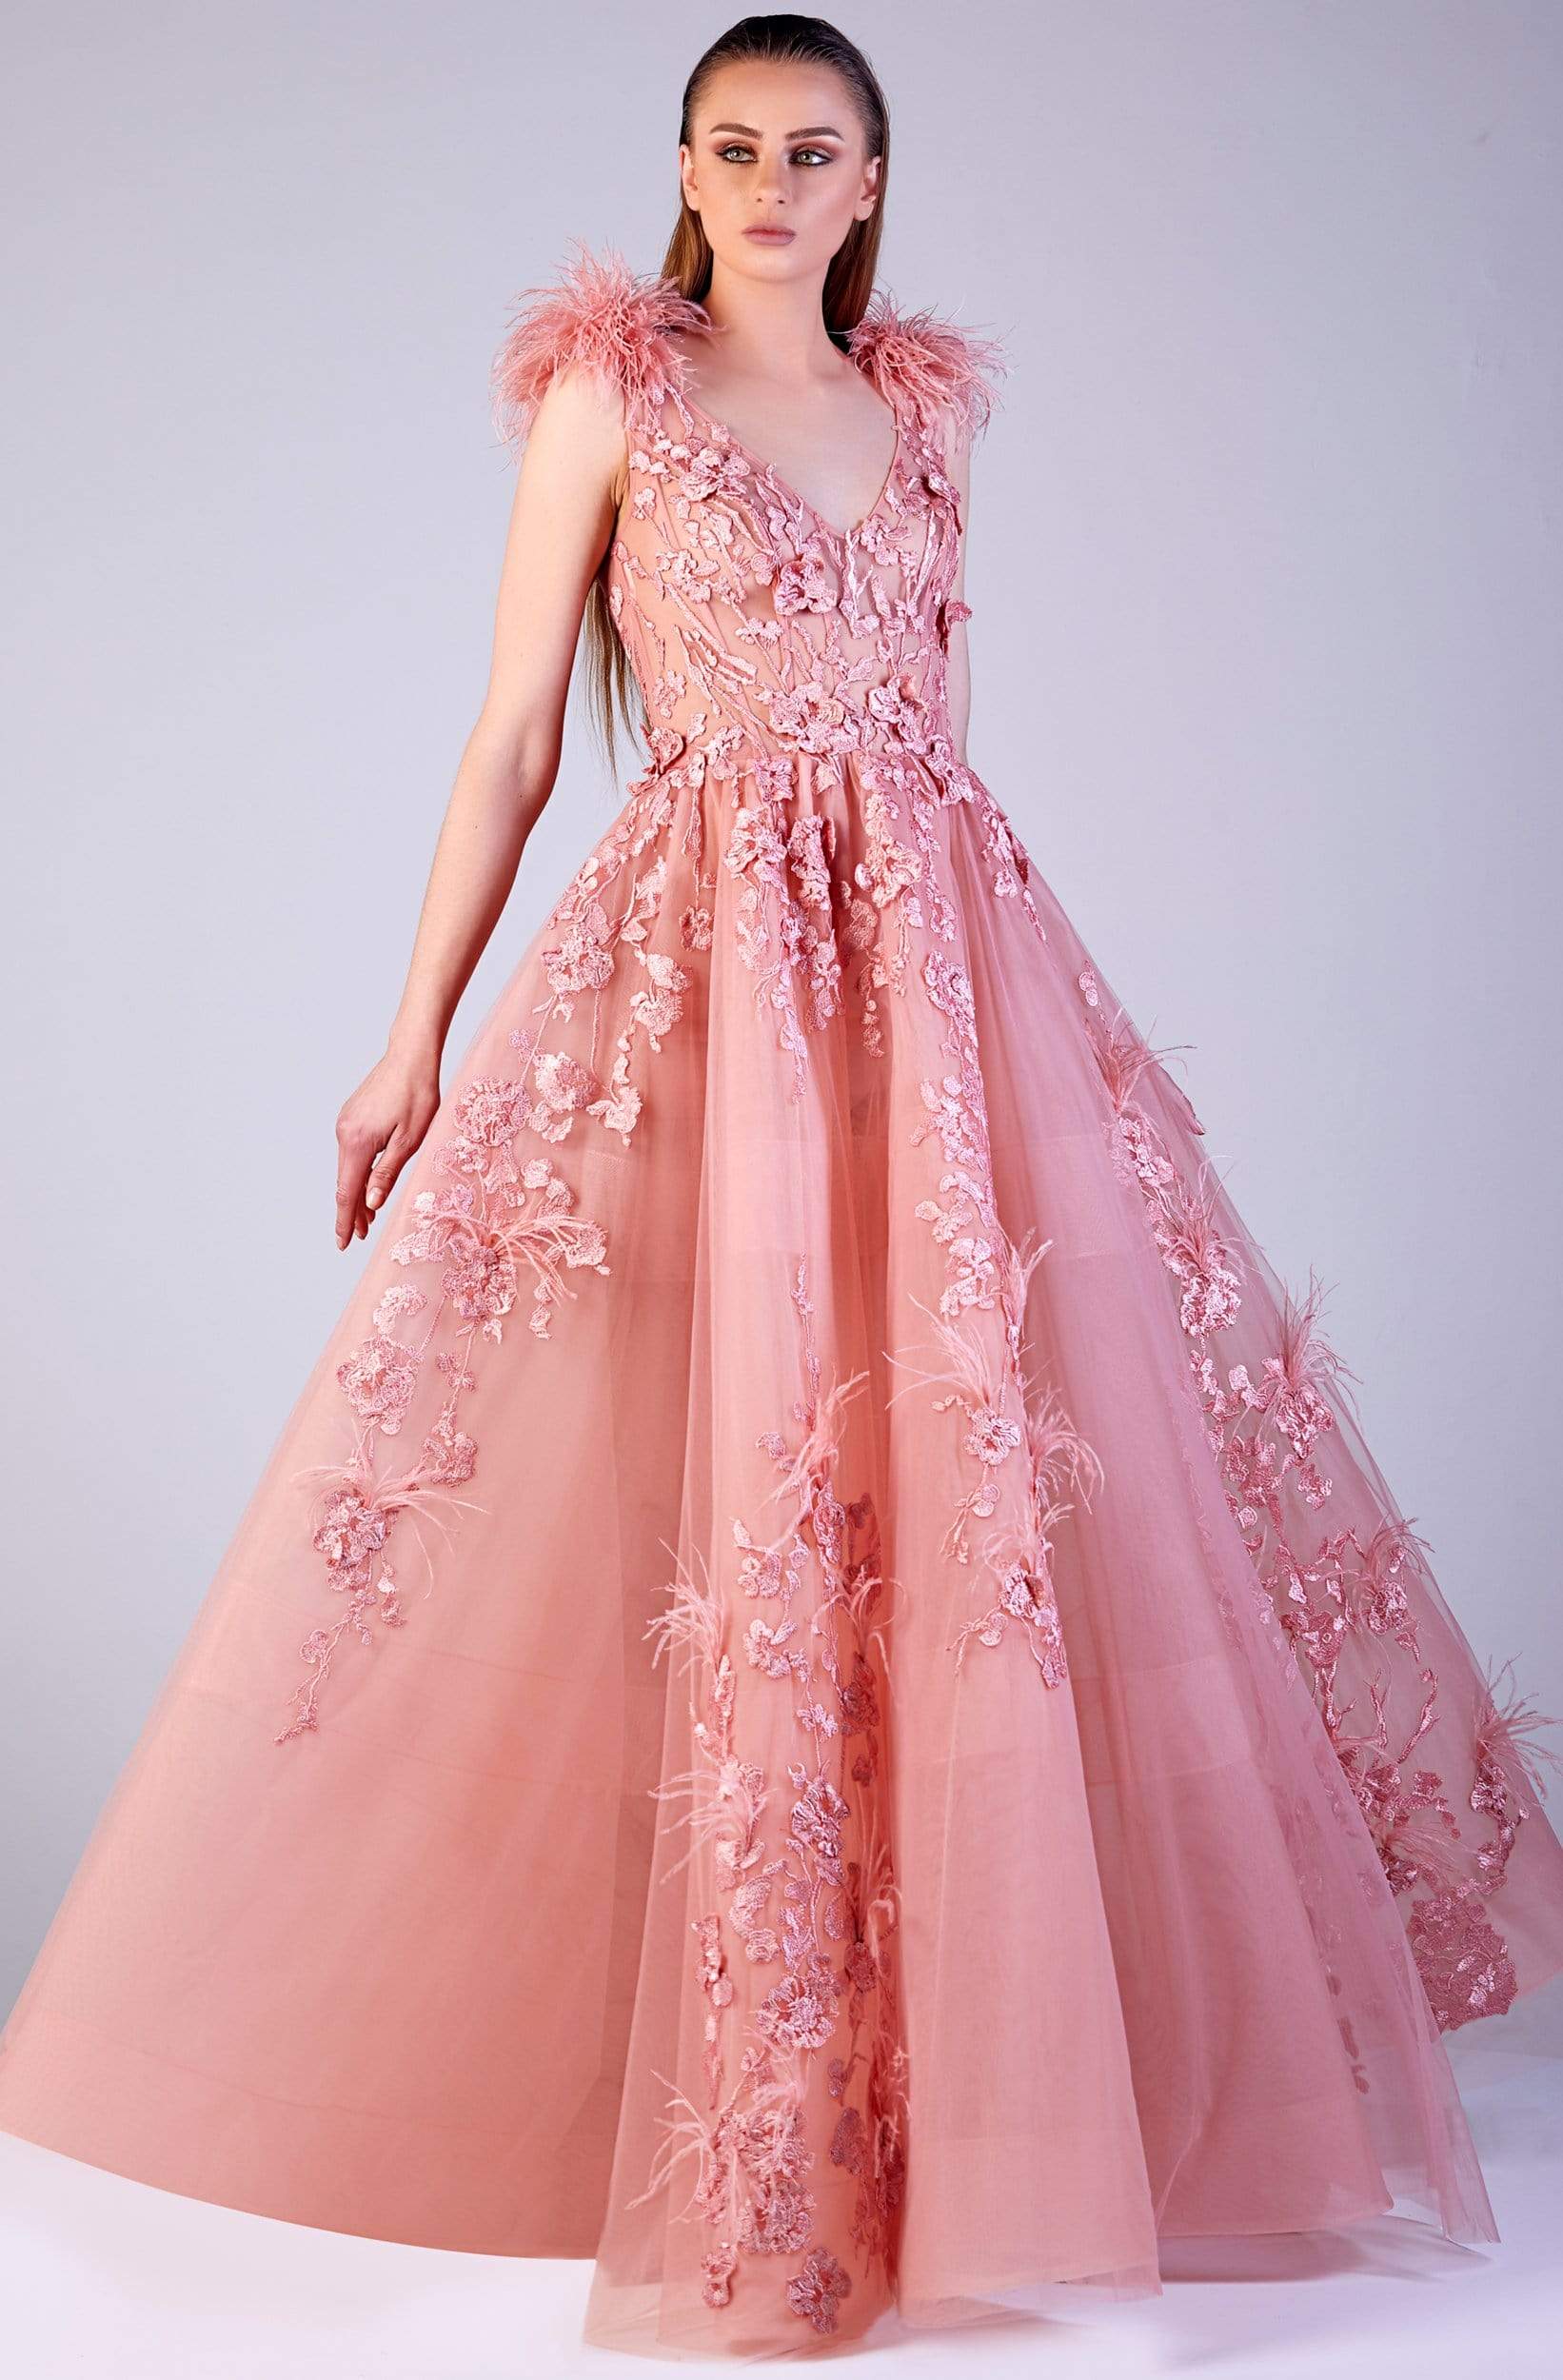 Image of Gatti Nolli Couture - OP-5183 Floral Appliqued Fringed Ballgown